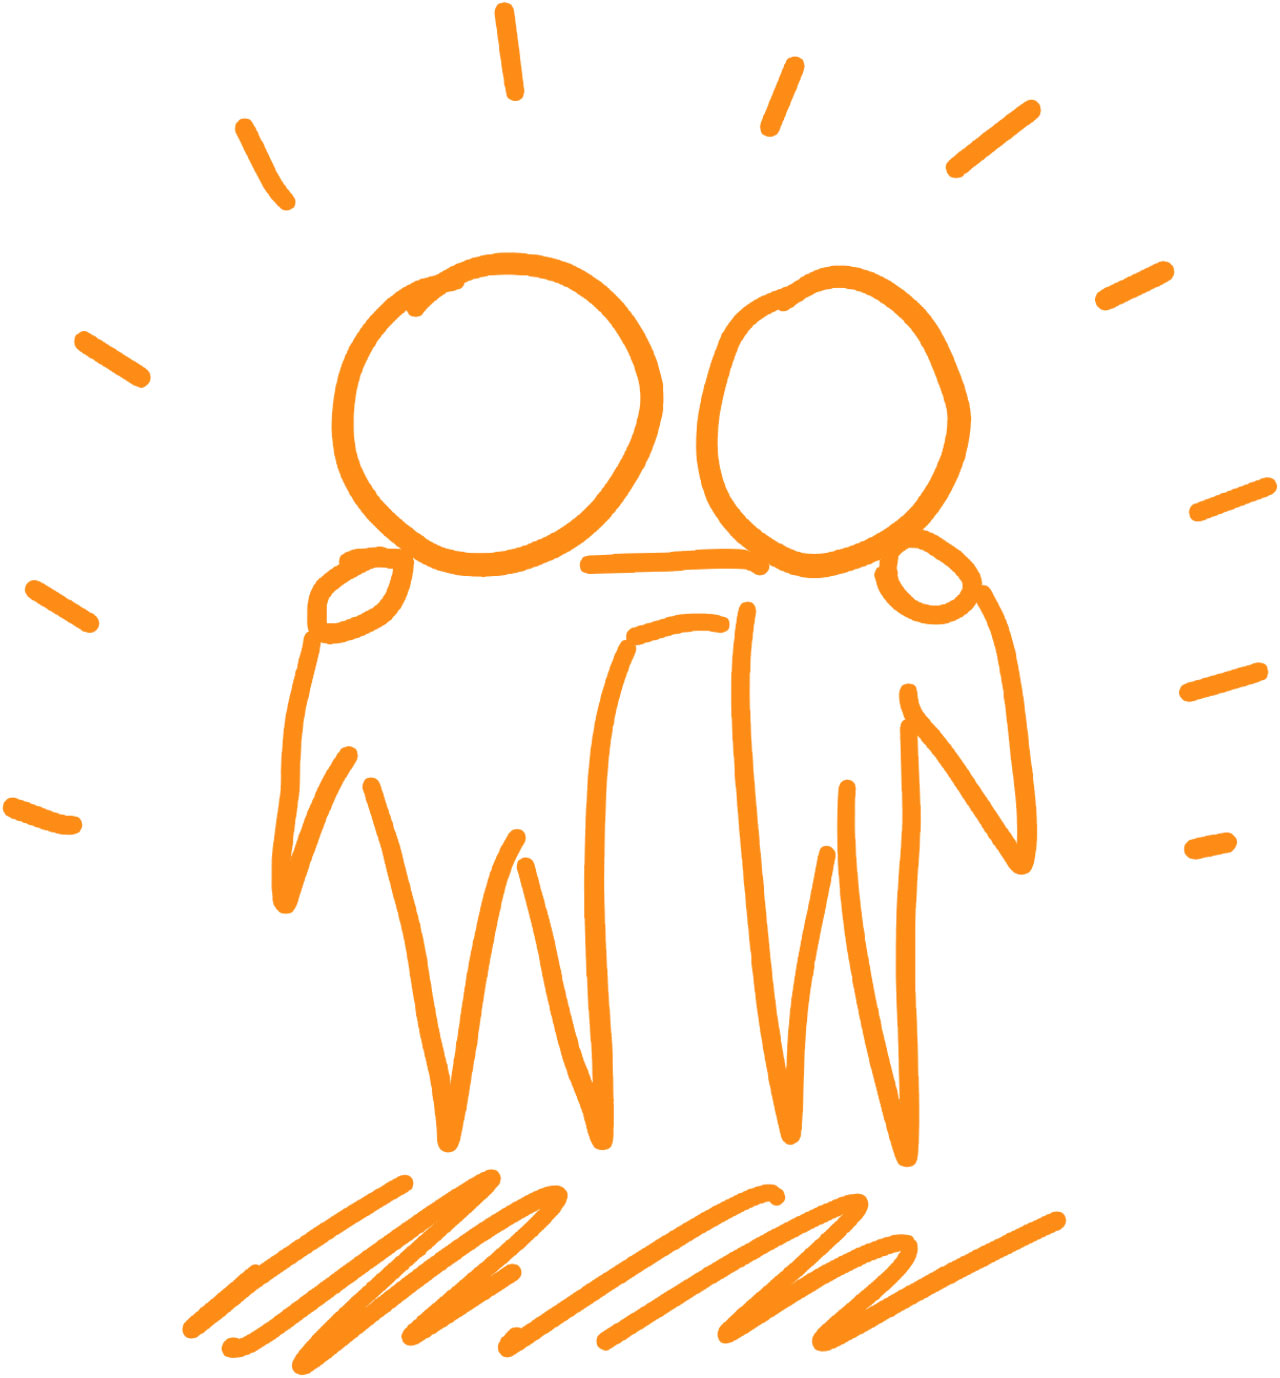 An illustration depicting two individuals standing closely together, each with one arm around the other's shoulder, displaying a sense of friendship or companionship.